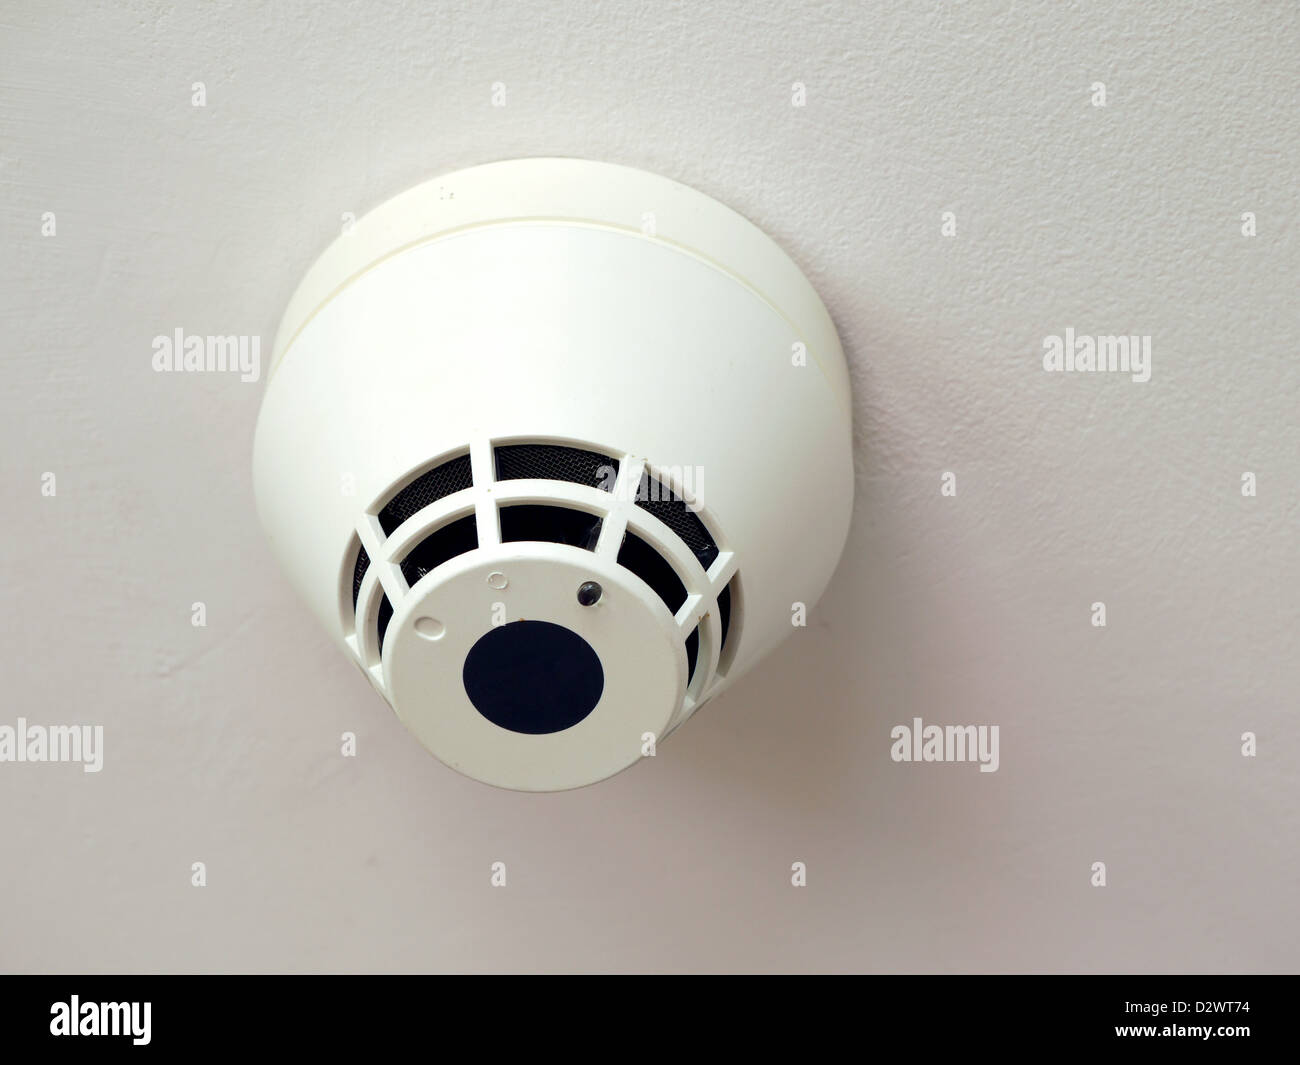 Smoke detector mounted to the ceiling Stock Photo